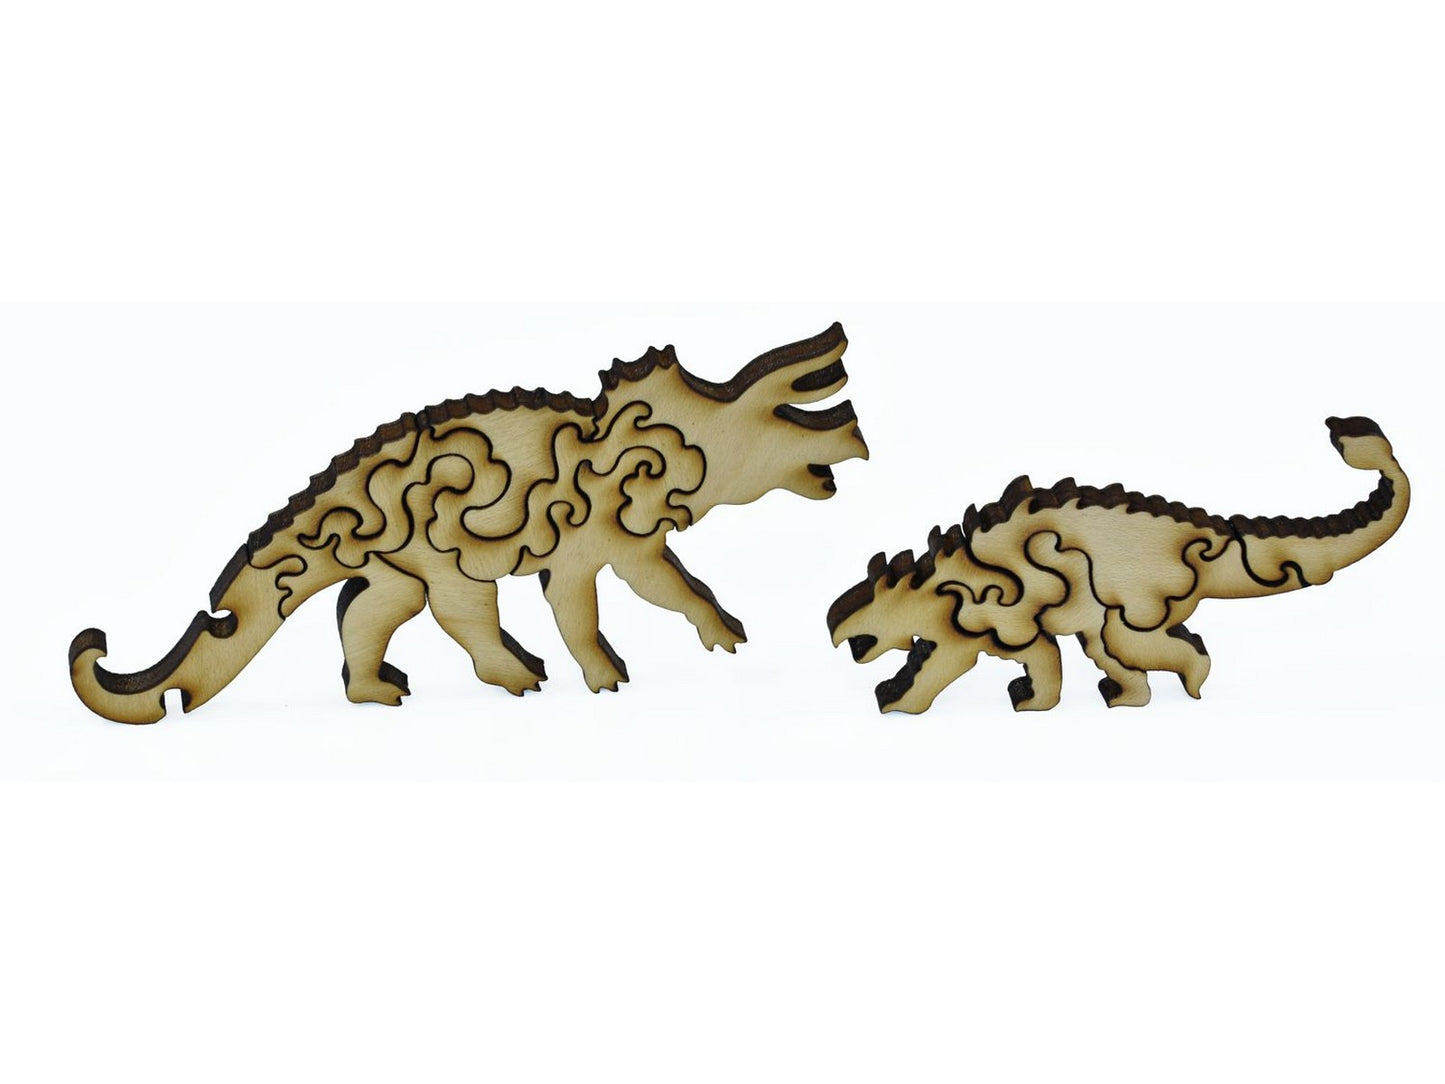 A closeup of pieces shaped like a Triceratops and an Ankylosaurus.